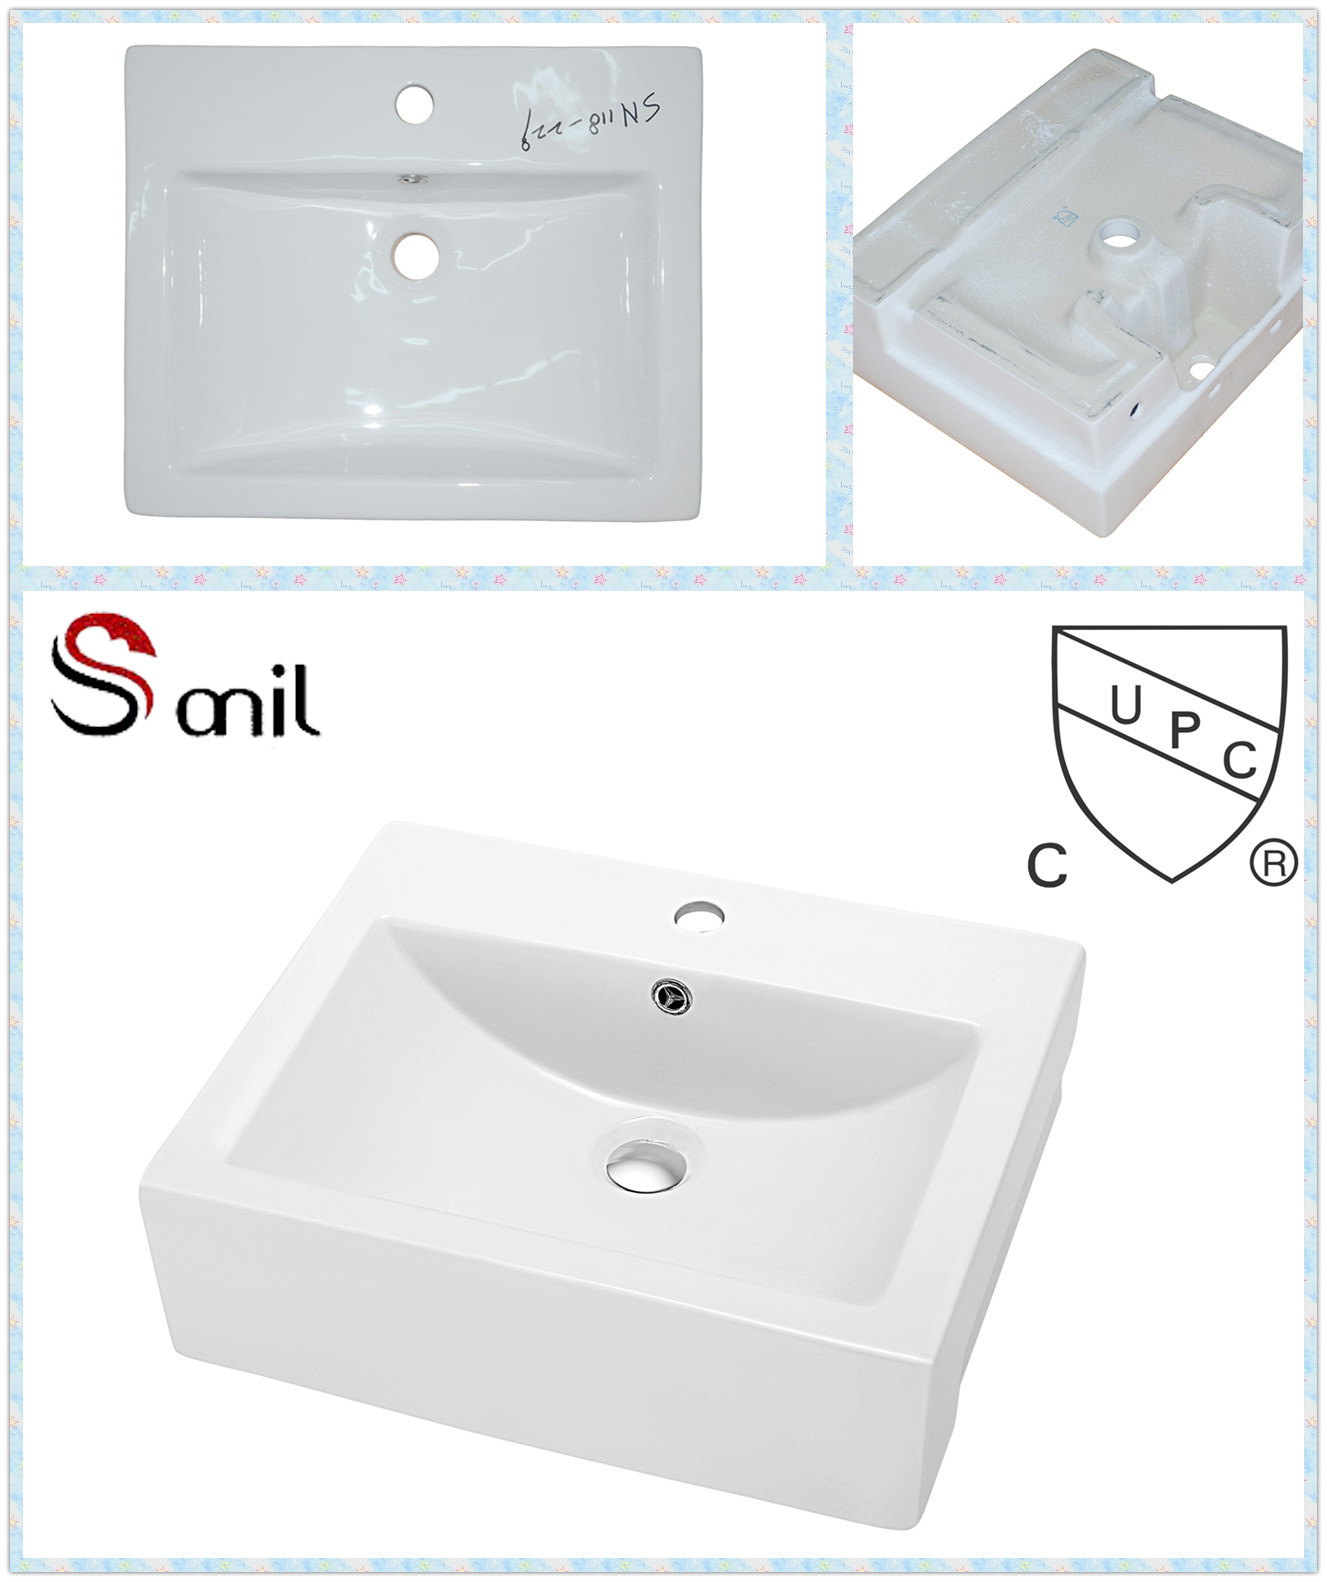 Supply Rectangular Porcelain Semi-Counter Sink with Cupc Certification (SN118-229)